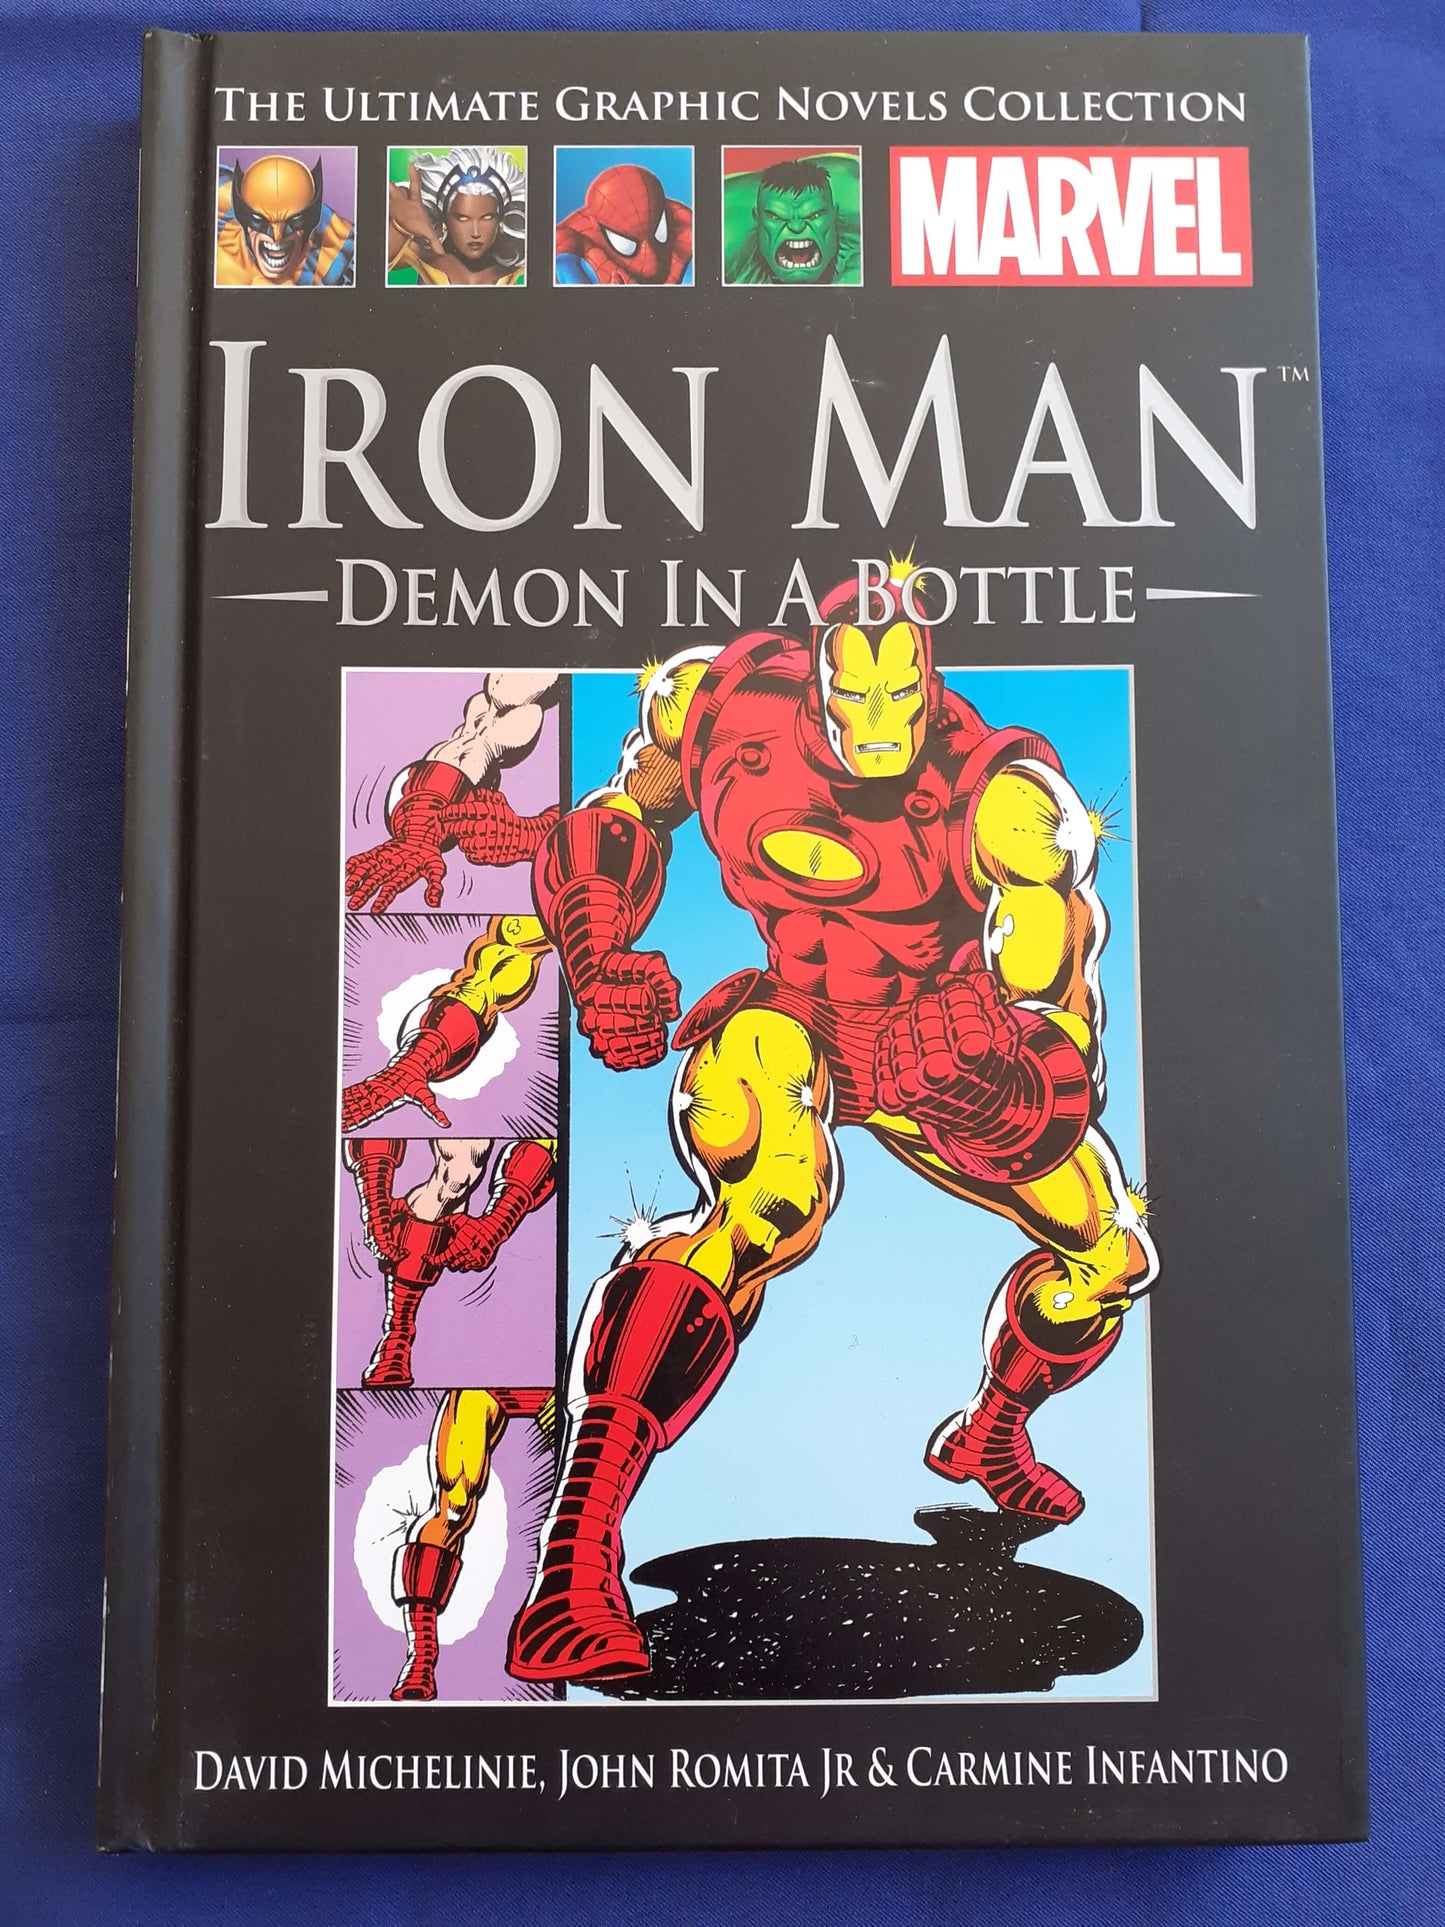 iron man, iron man demon in a bottle, marvel comics, marvel graphic novels, marvel ultimate graphic collection - Best Books